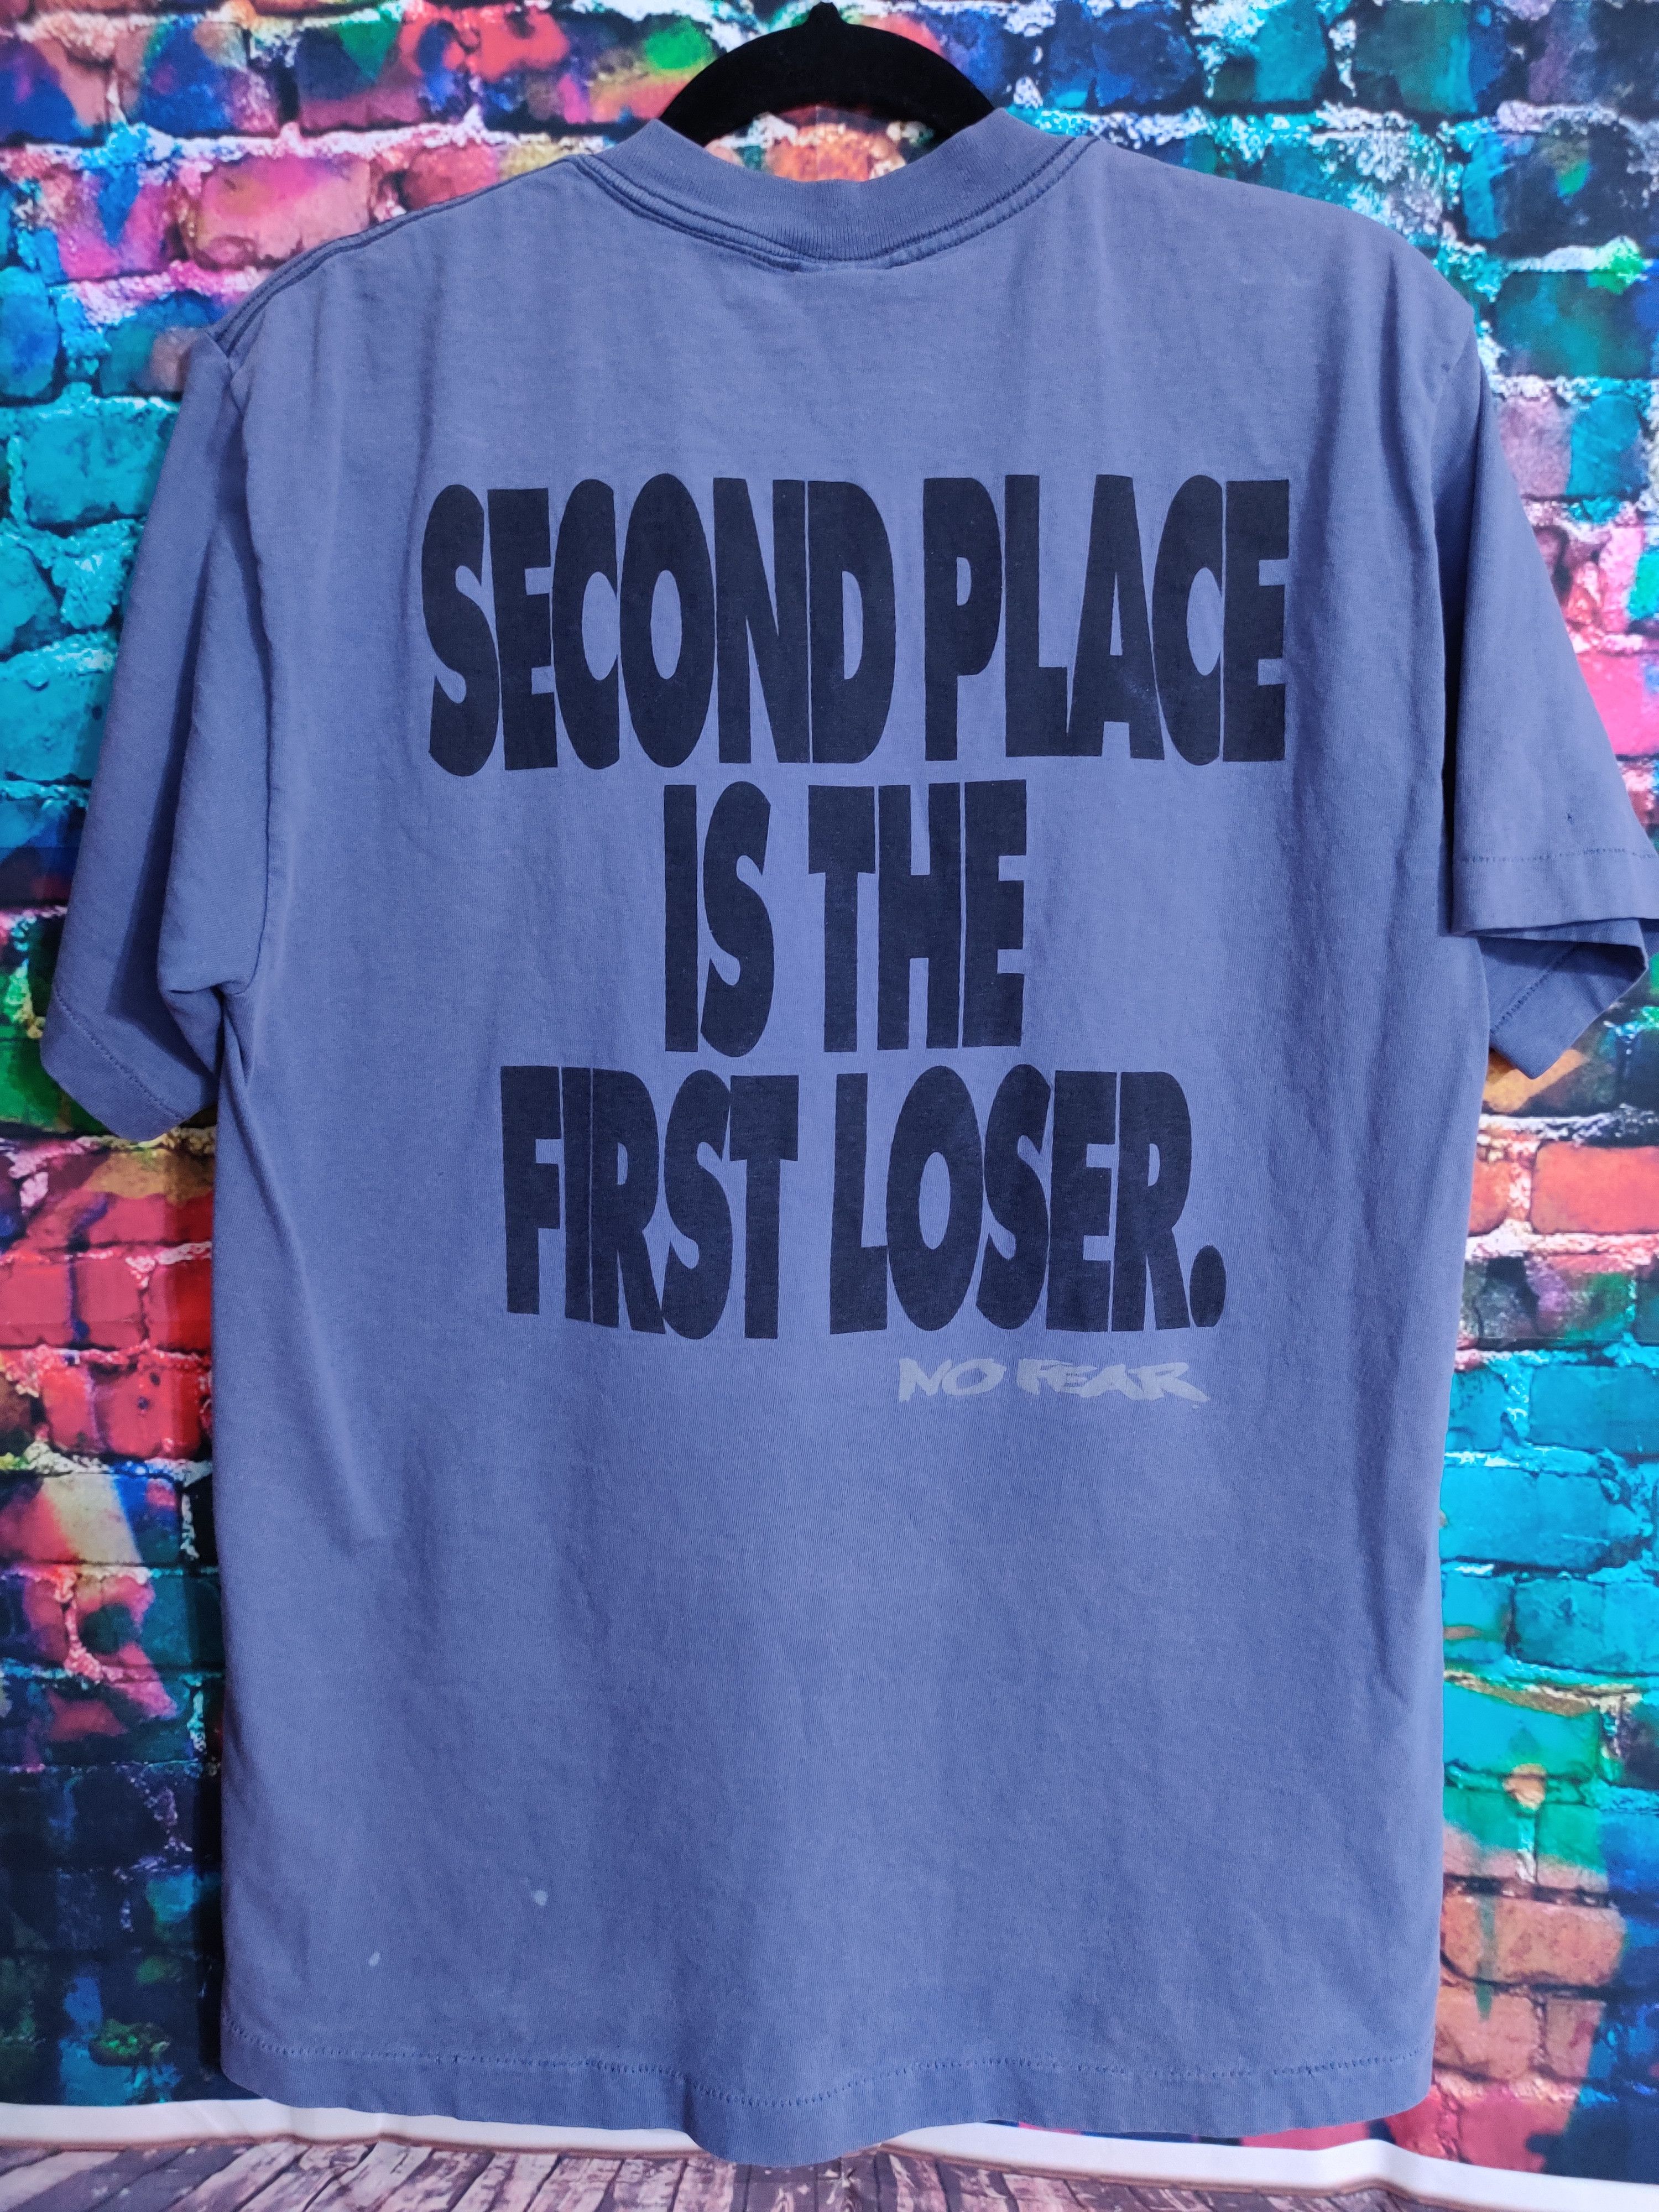 Vintage Vintage No Fear Second Place First Loser Single Stitched Tee Size US L / EU 52-54 / 3 - 1 Preview